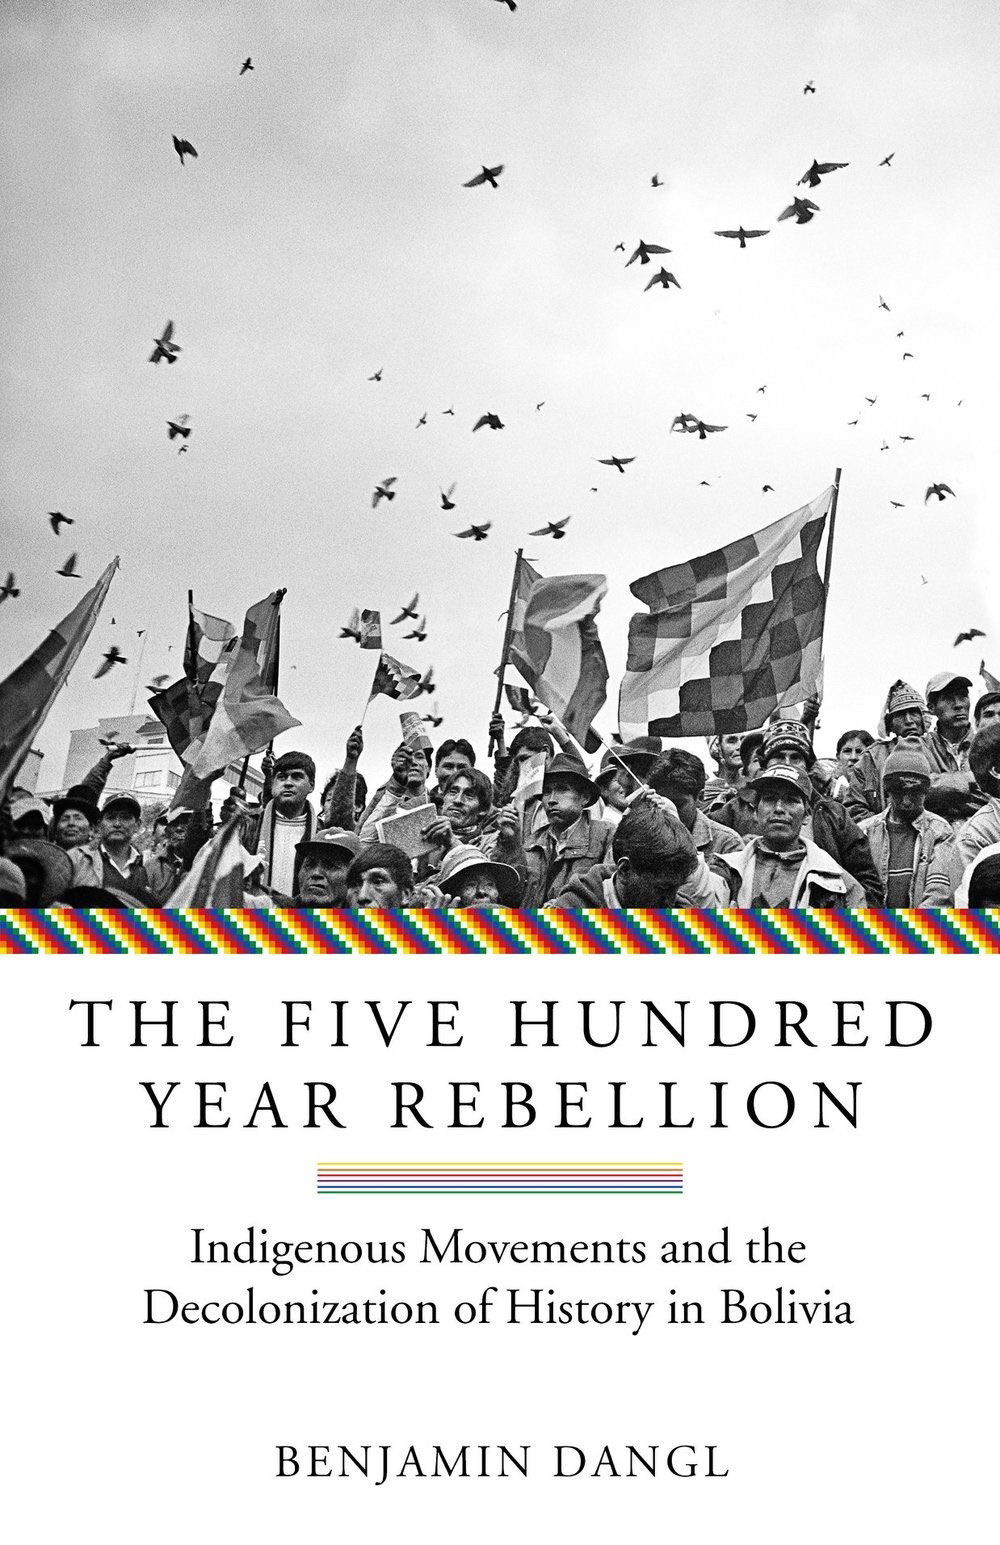 The Five Hundred Year Rebellion: Indigenous Movements and the Decolonization of History in Bolivia by Benjamin Dangl